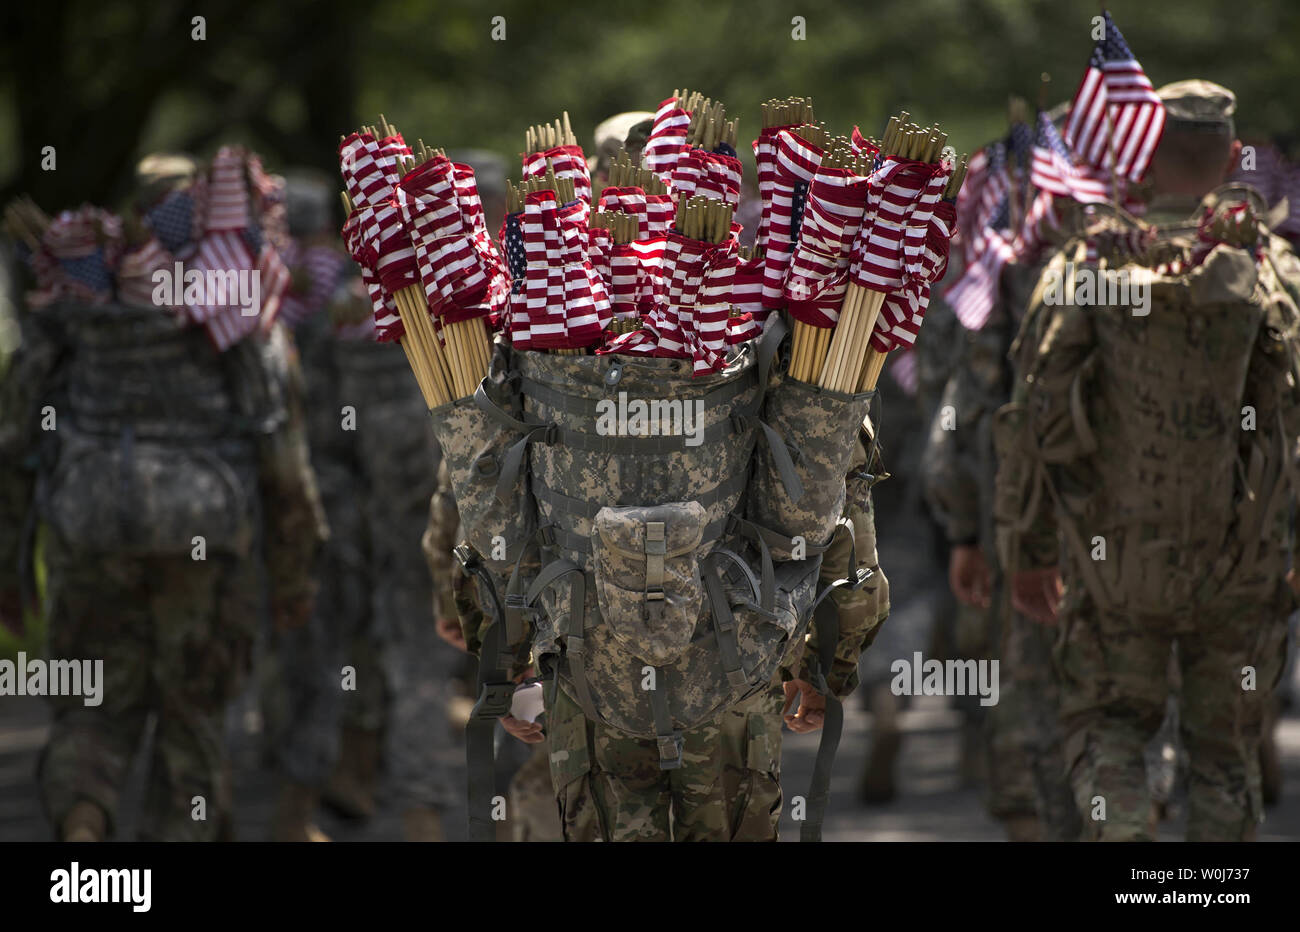 A soldier with the U.S. Army 3rd Infantry Regiment (Old Guard) carries flags as he prepares to place American flag at grave markers as part of the annual Flags-In event for Memorial Day at Arlington National Cemetery in Arlington, Virginia on May 26, 2016. Members of The Old Guard placed an America flag at more than 230,000 grave markers at Arlington in honor of of Nation's fallen military members. The tradition has been conducted since 1948. Photo by Kevin Dietsch/UPI Stock Photo